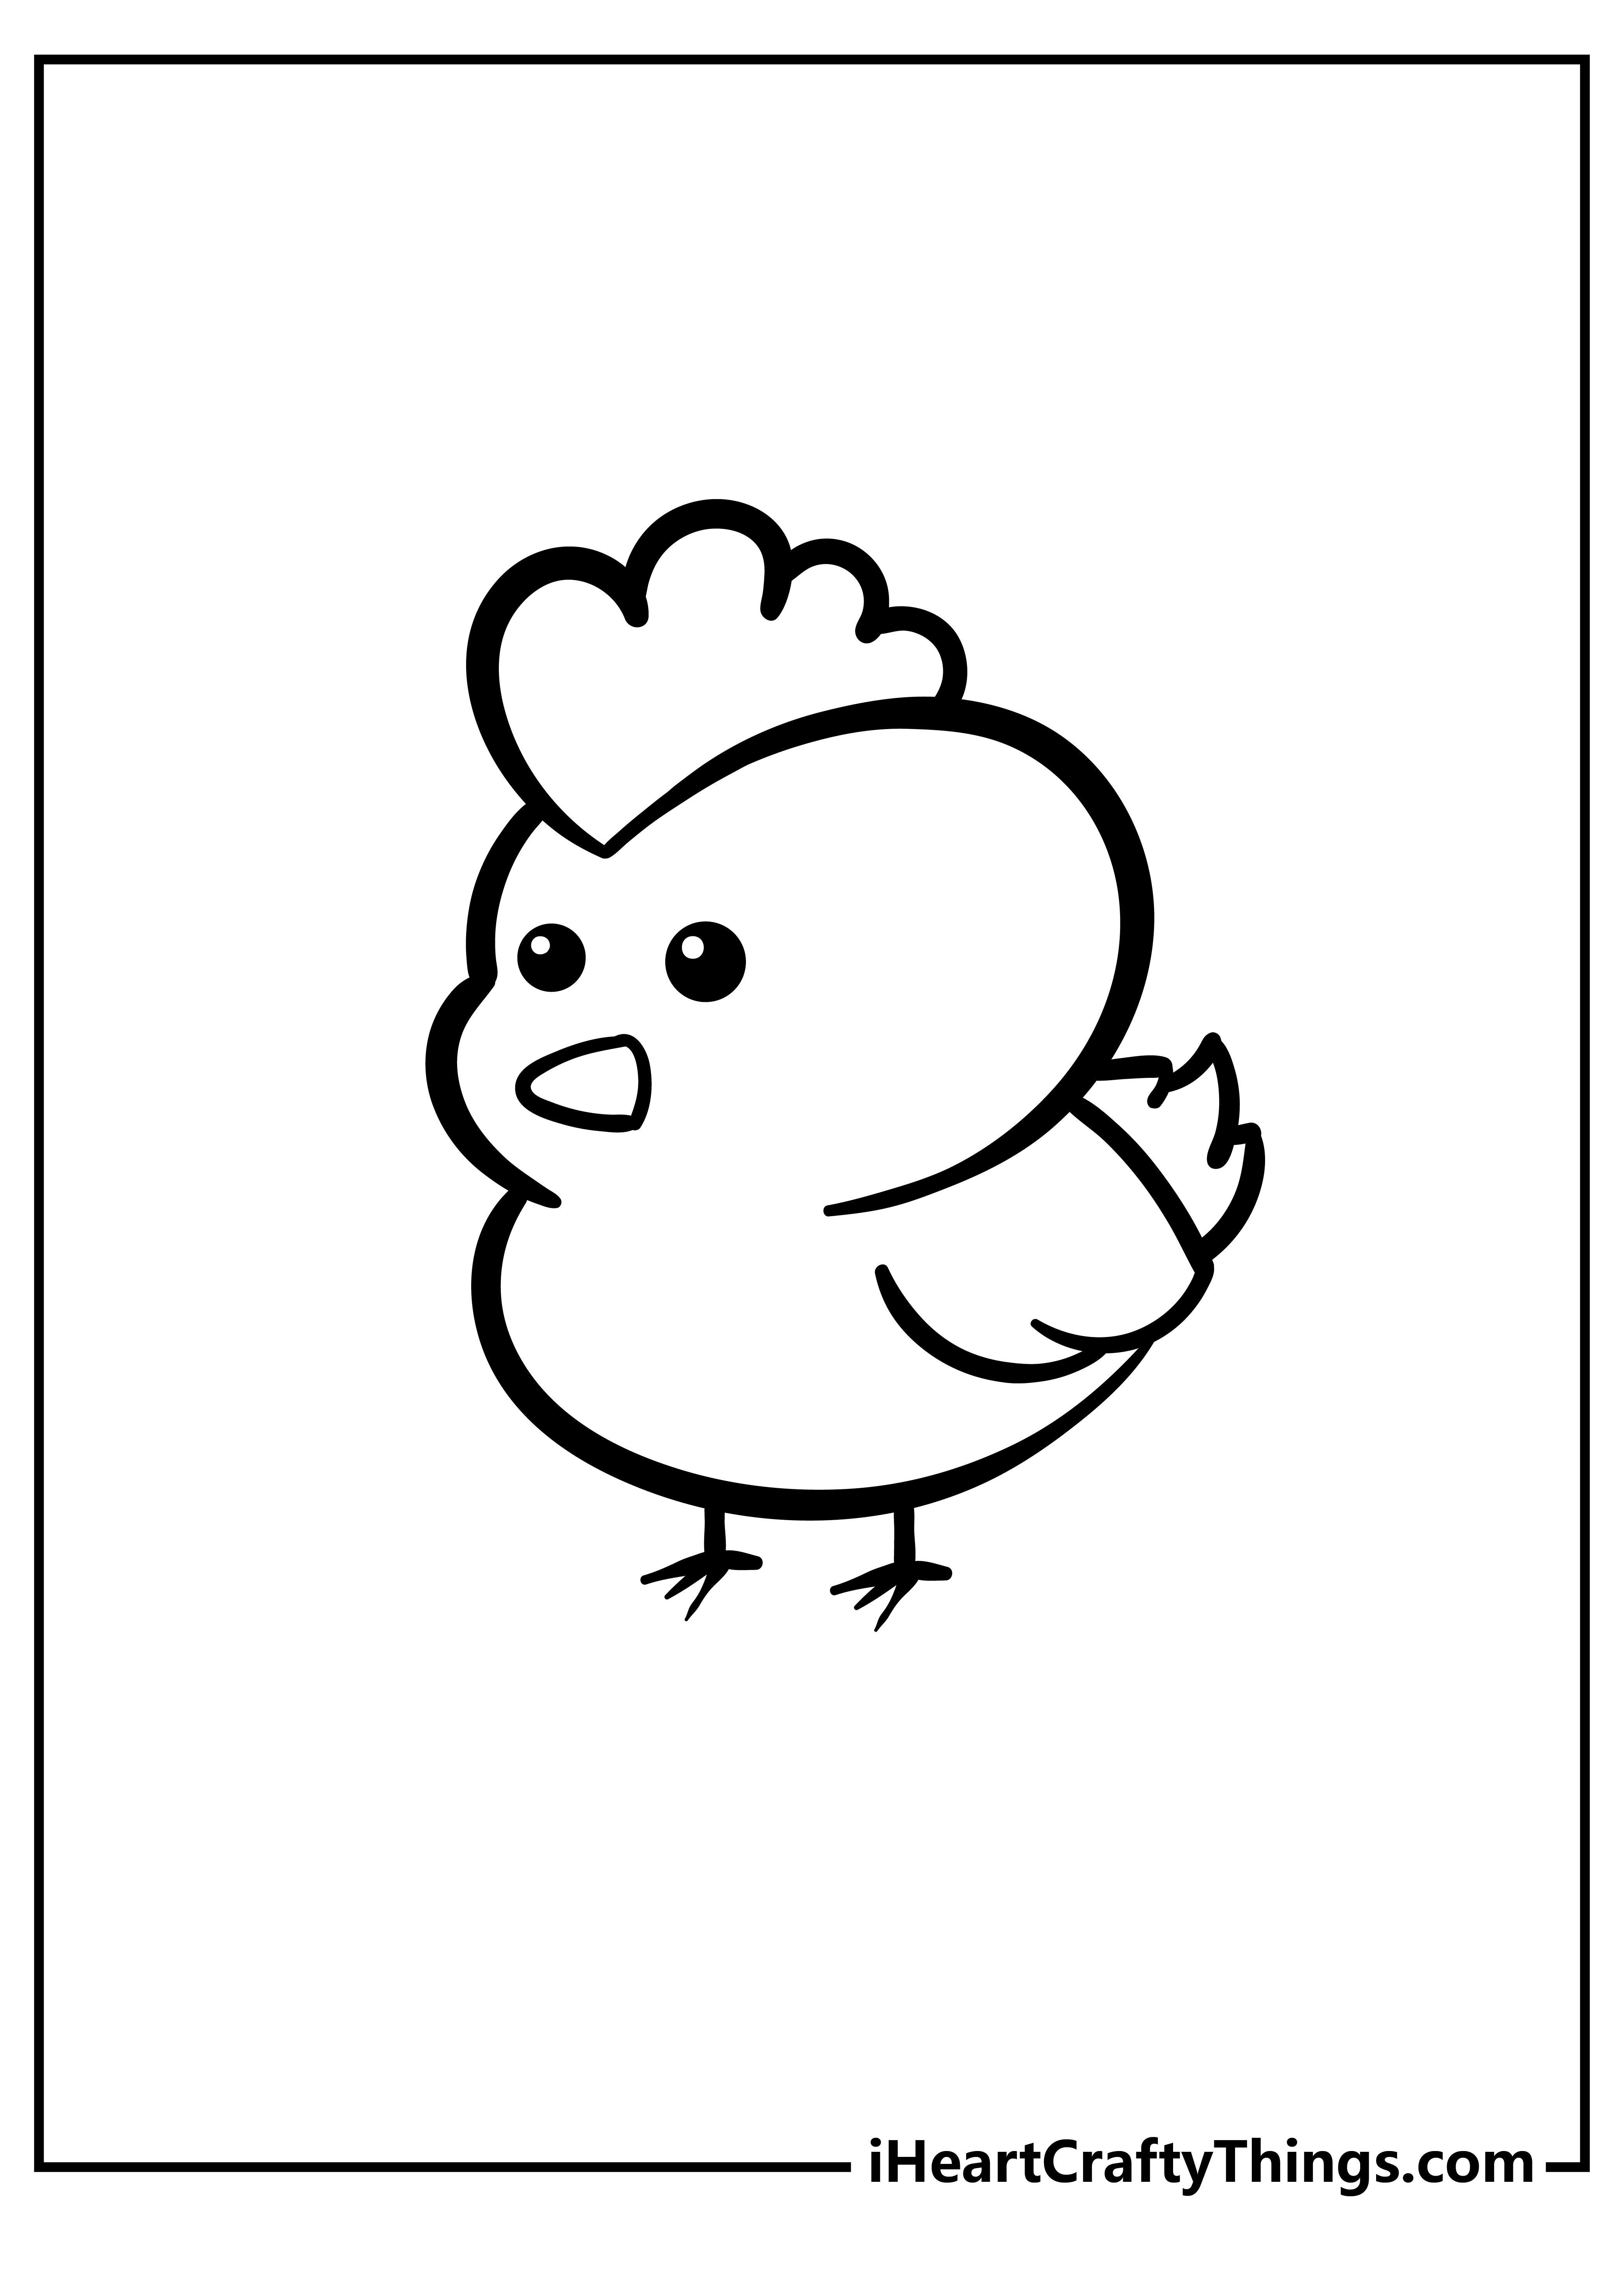 Printable Chicken Coloring Pages Updated 20